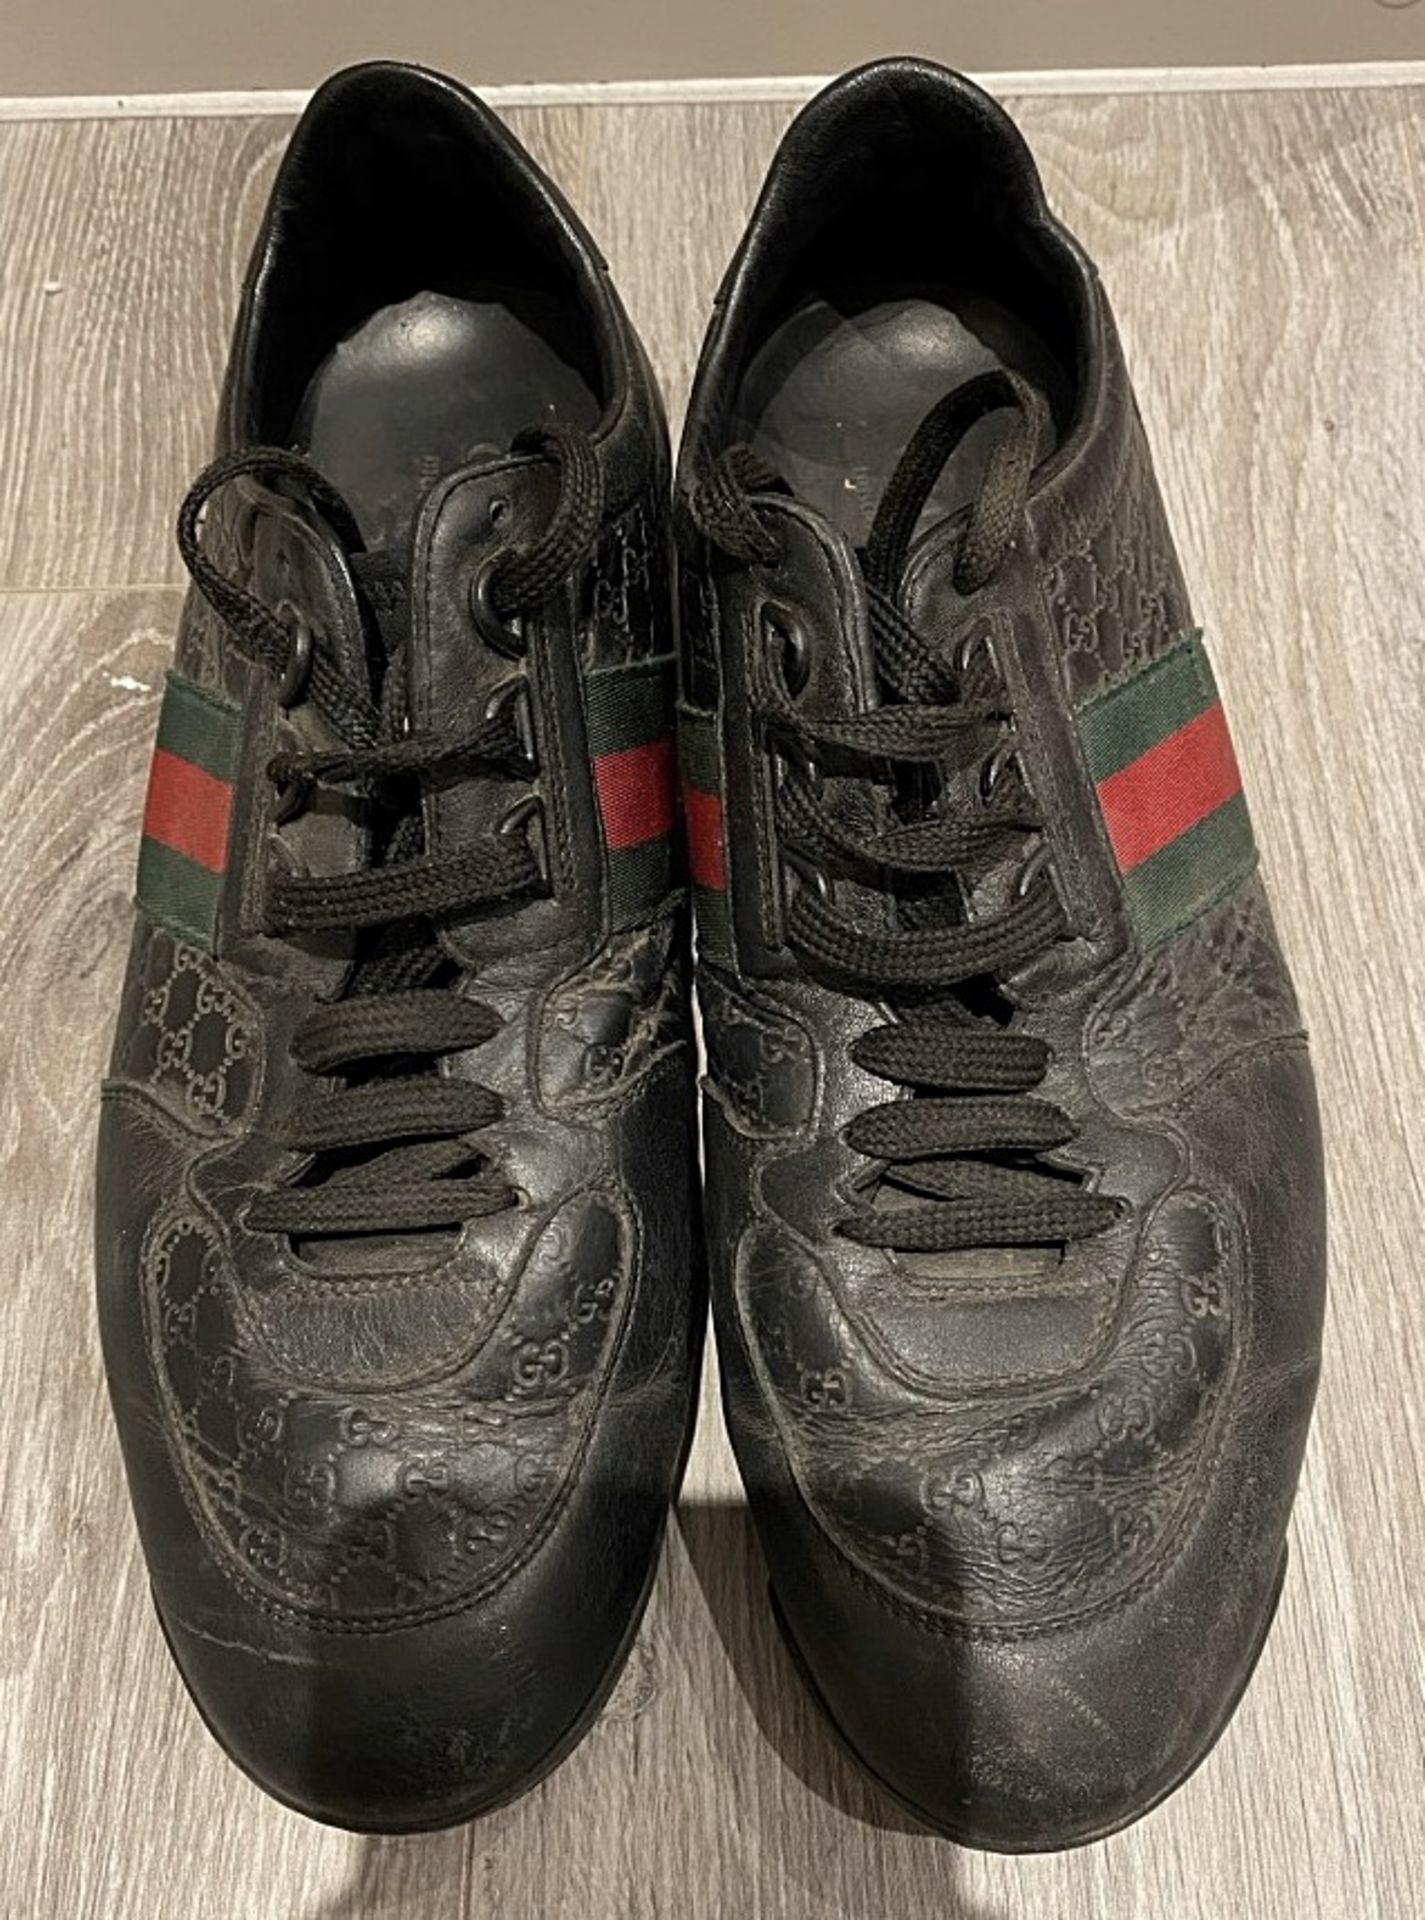 1 x Pair Of Genuine Gucci Mens Trainers In Black - Size: UK 8.5 - Preowned in Worn Condition - Ref - Image 2 of 4